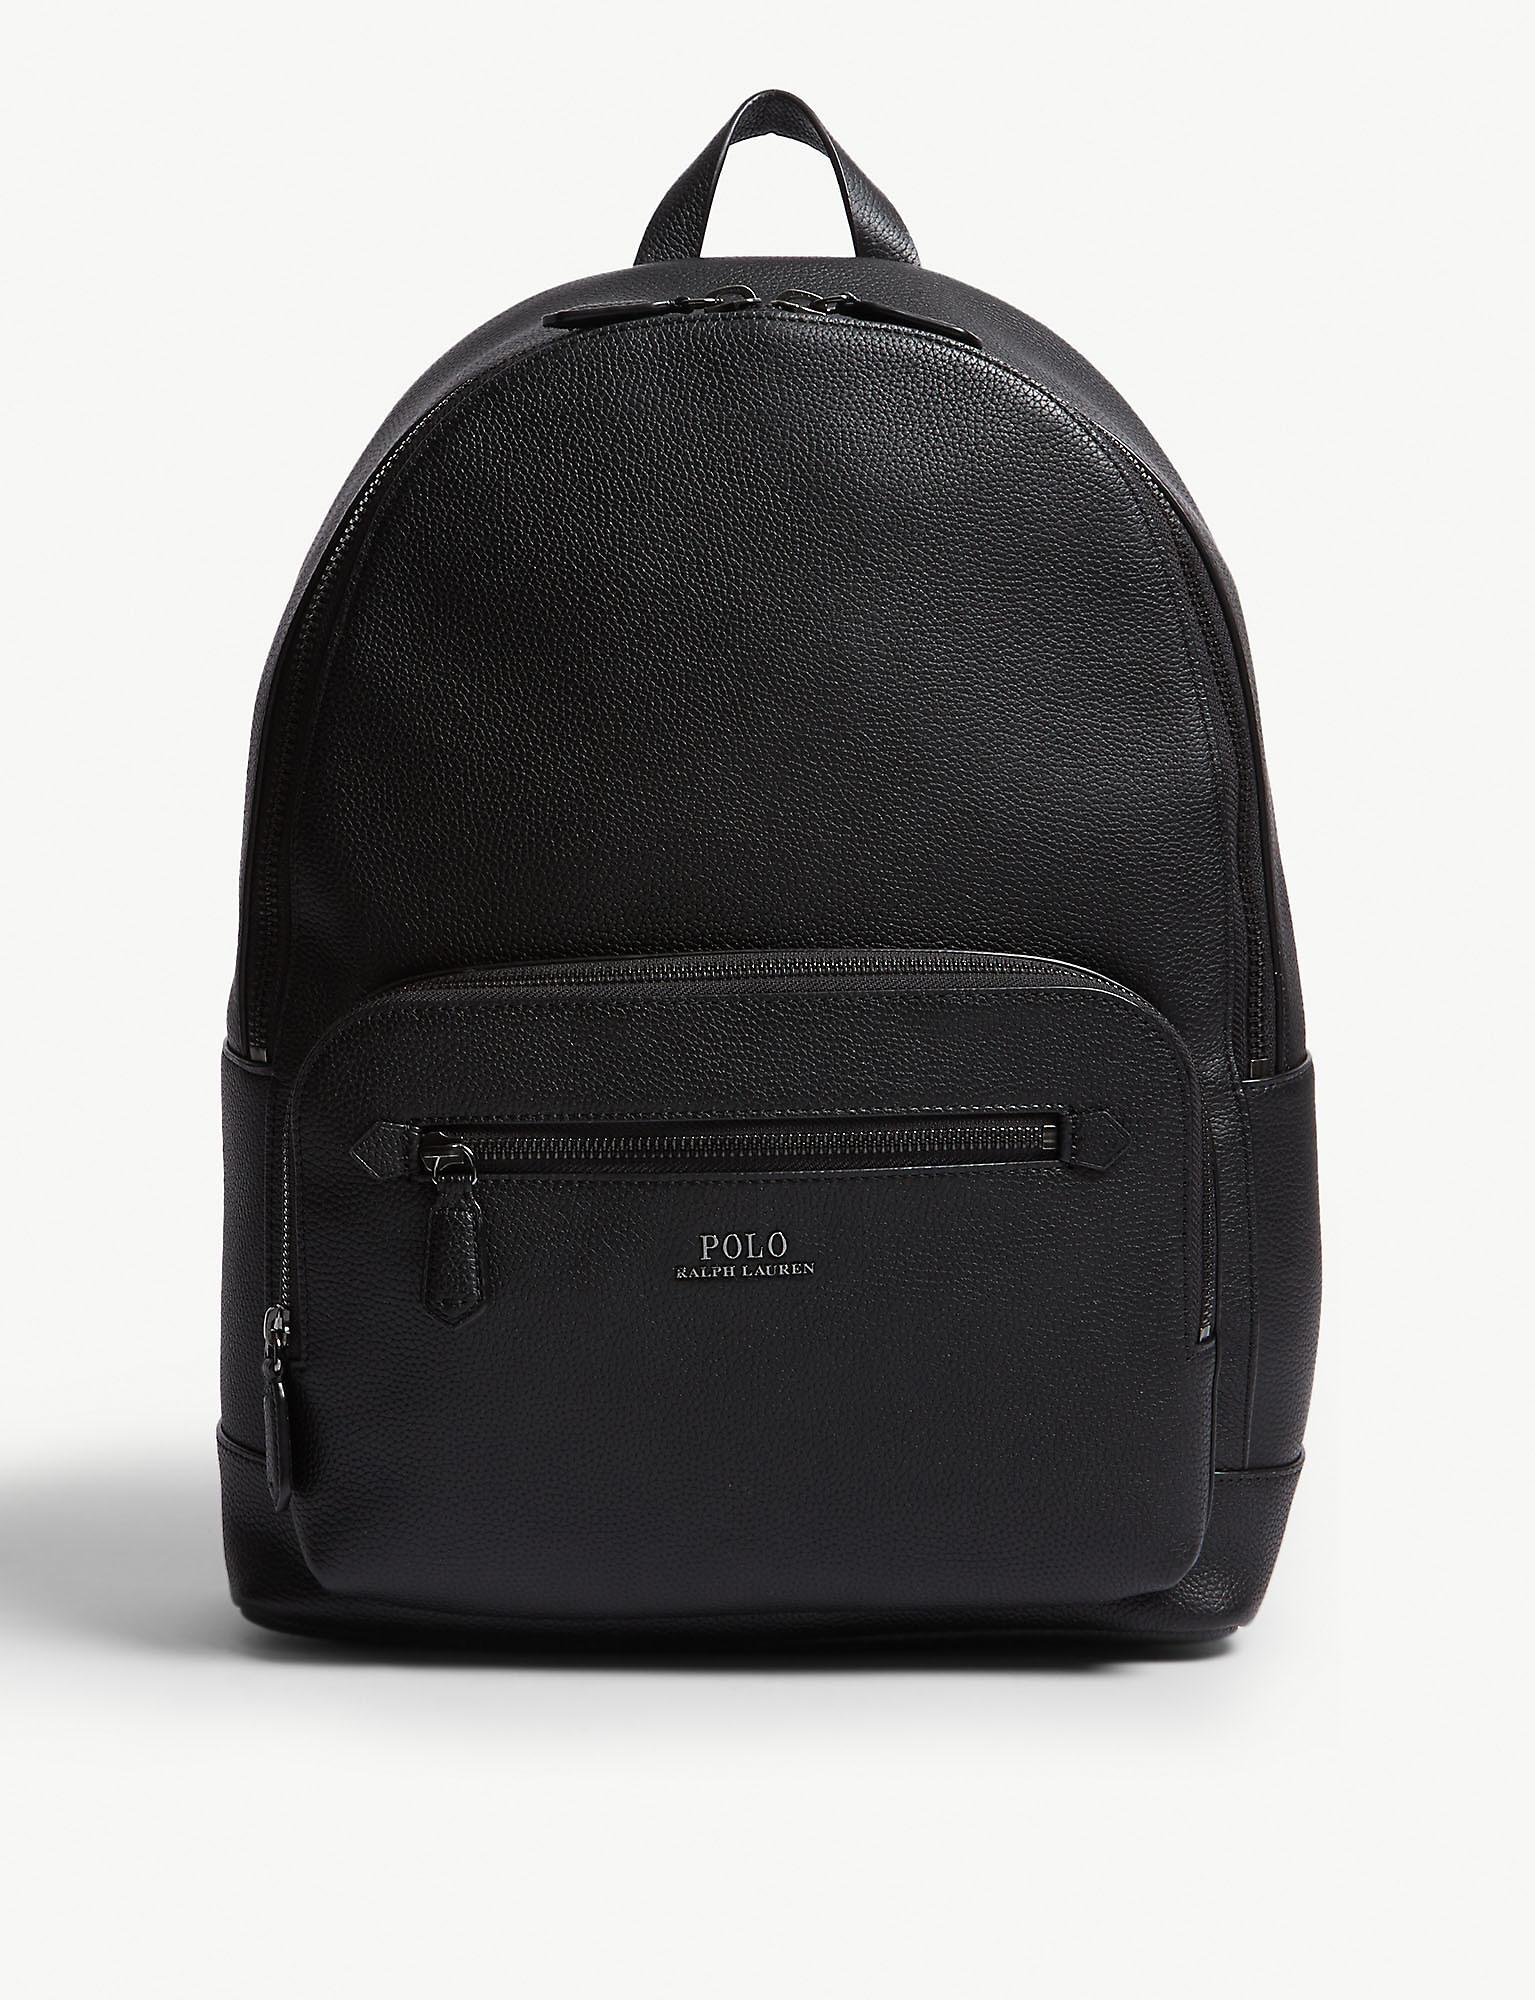 Polo Ralph Lauren Pebbled Leather Backpack in Black for Men - Lyst